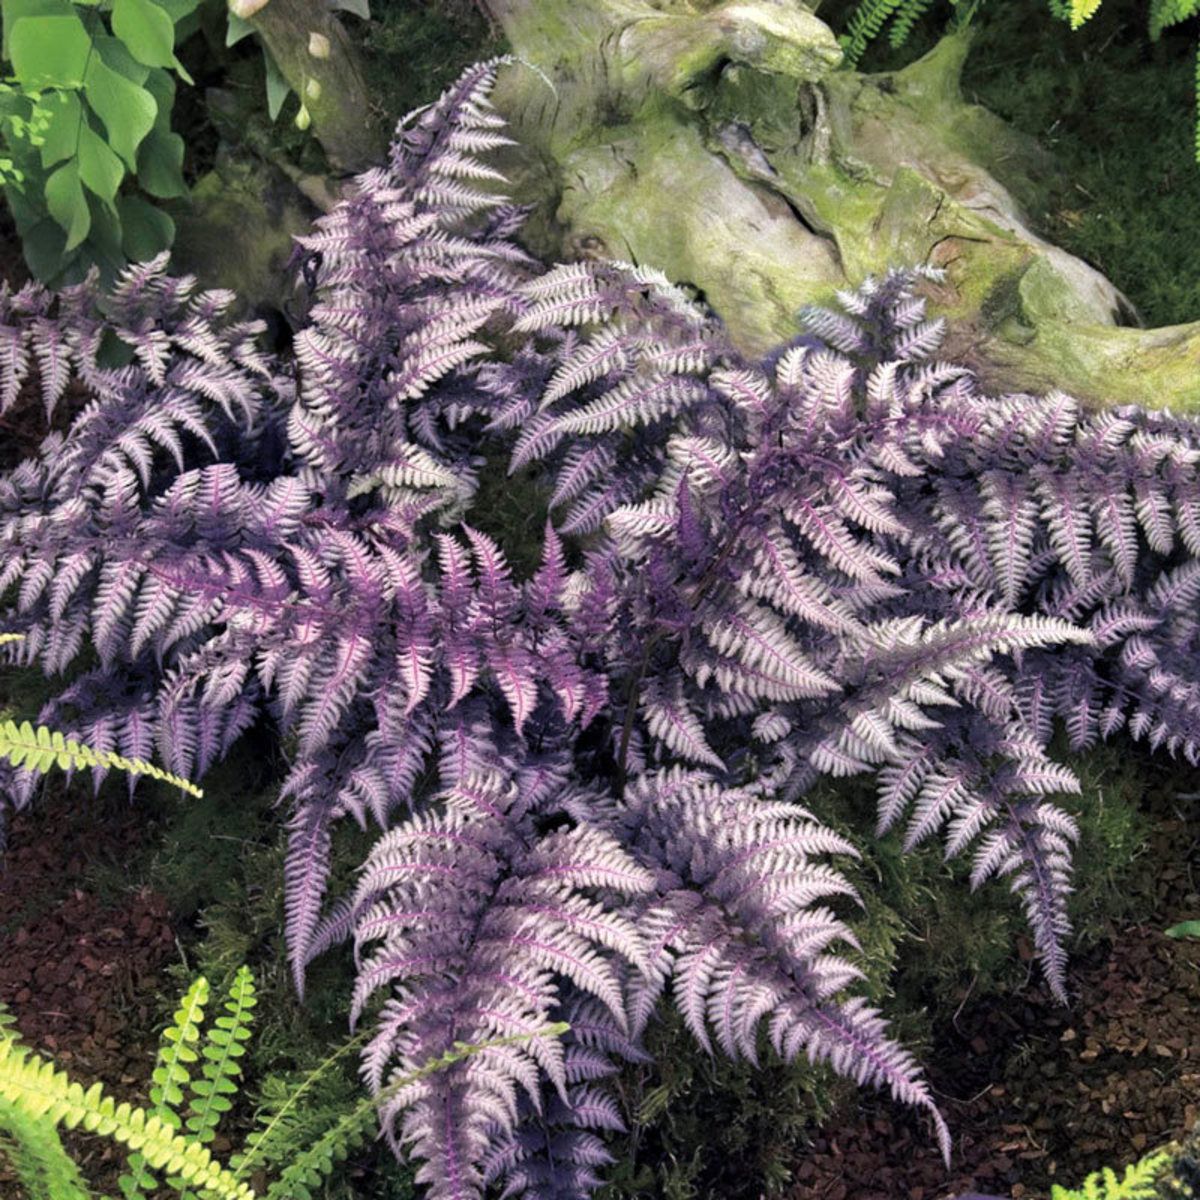 The shady serenity of its natural Oriental gardens is evoked. Due to the lovely combination of green and purple shades on its fronds that seem to be silver, it is one of the most common cultivated ferns.